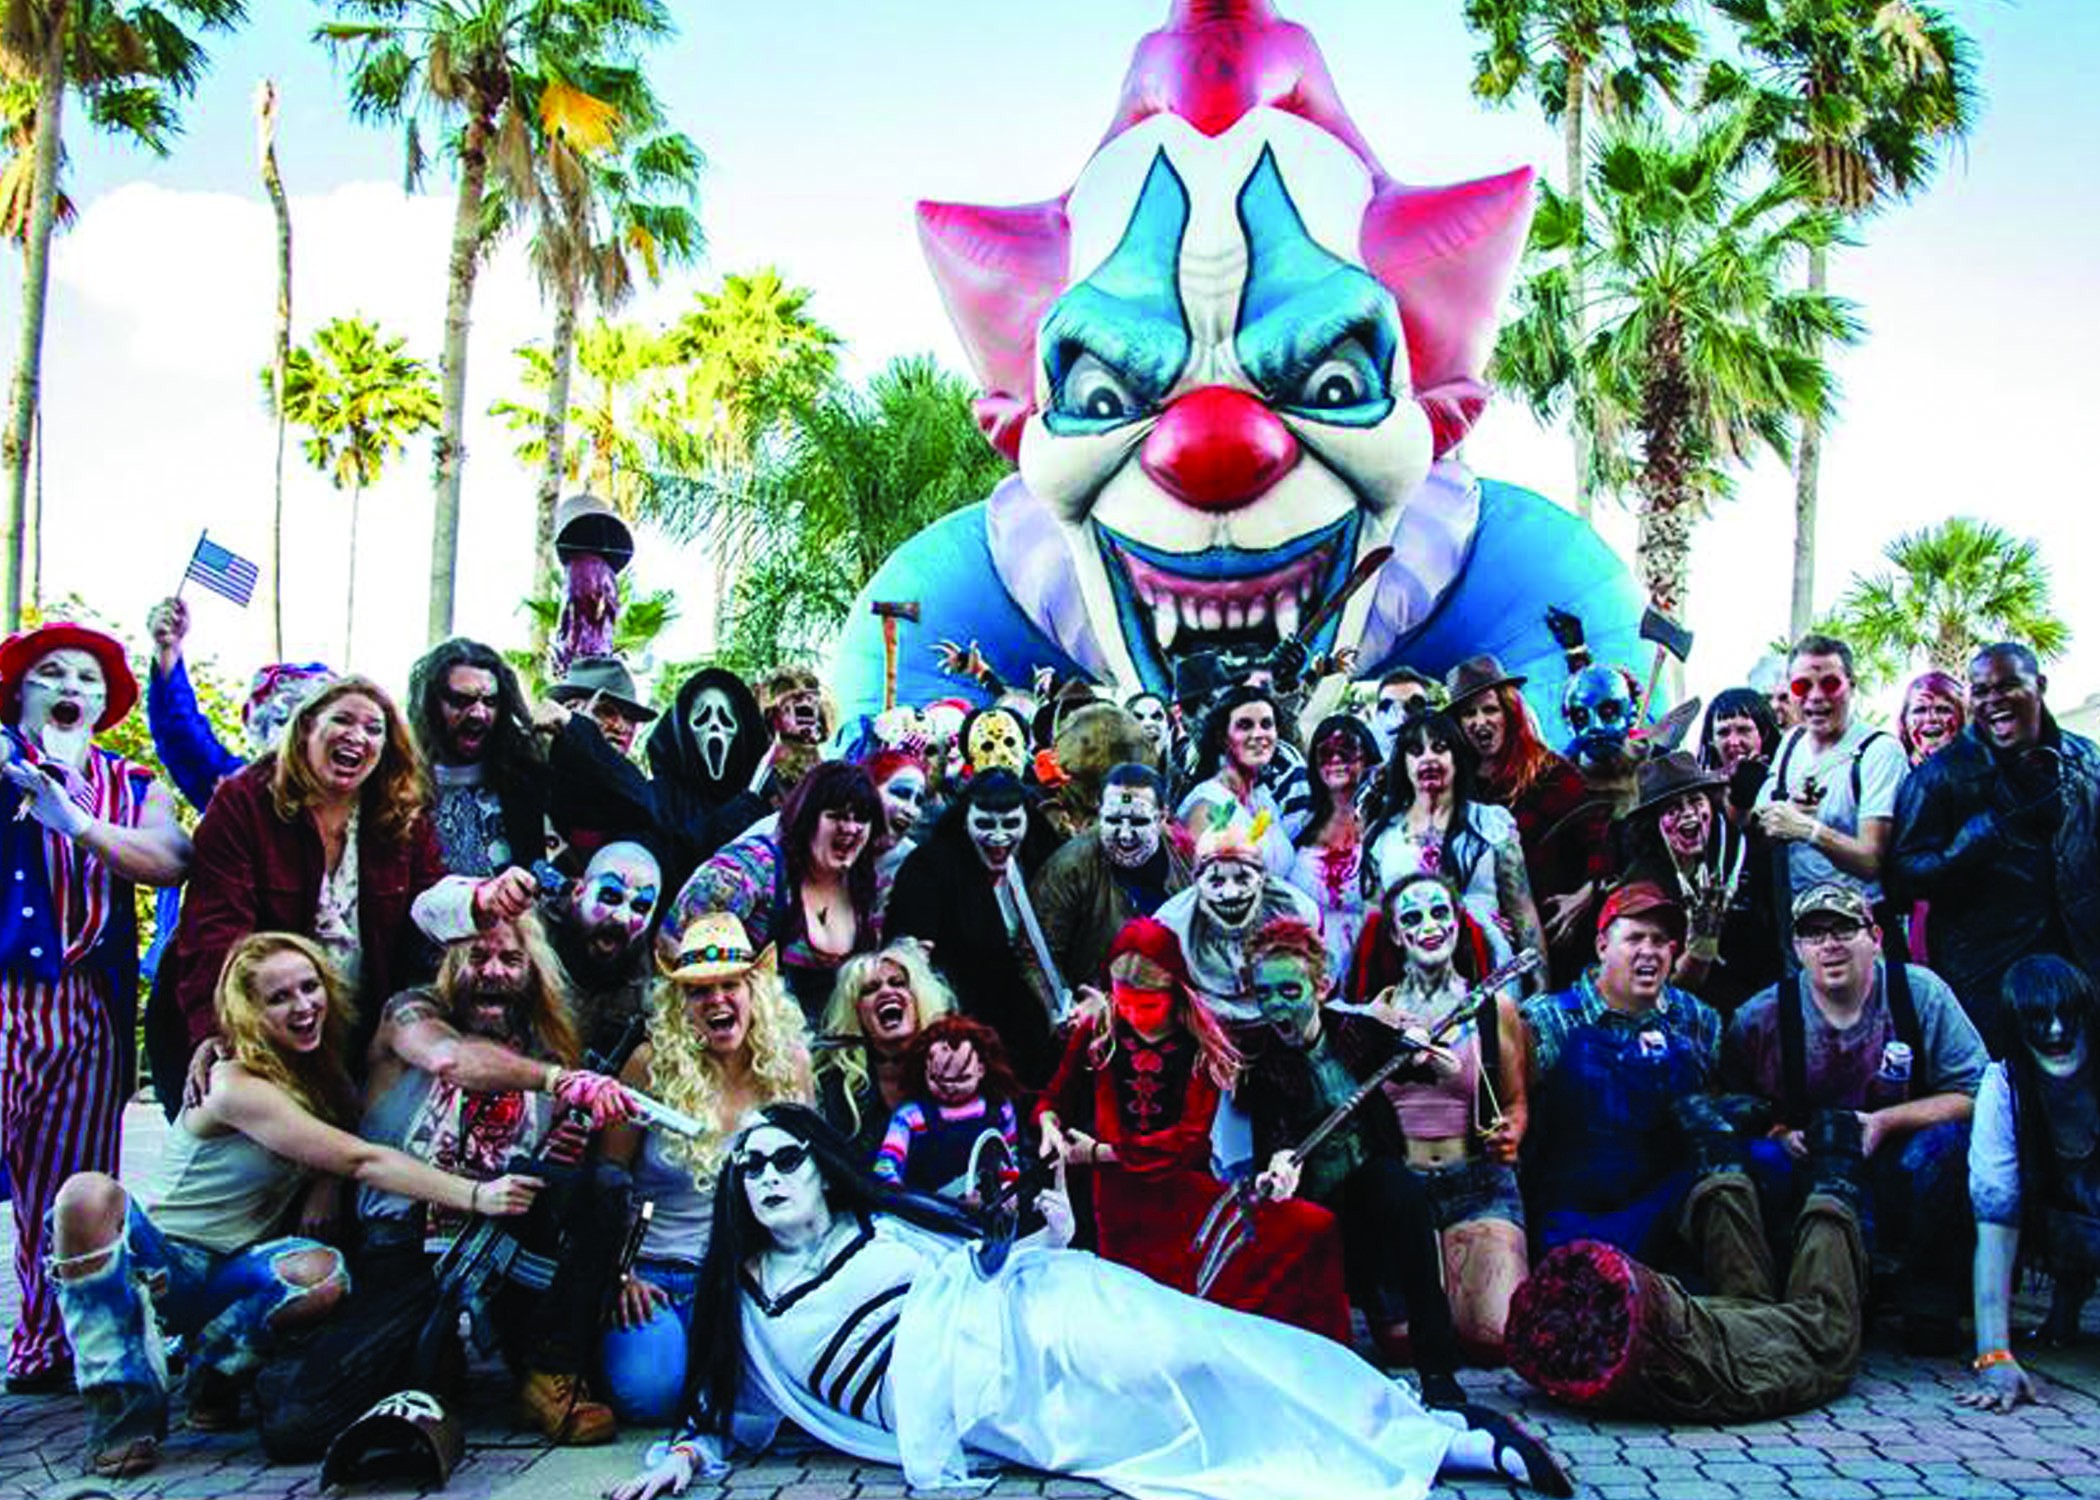 Spooky Empire returns for annual spring horror convention this weekend